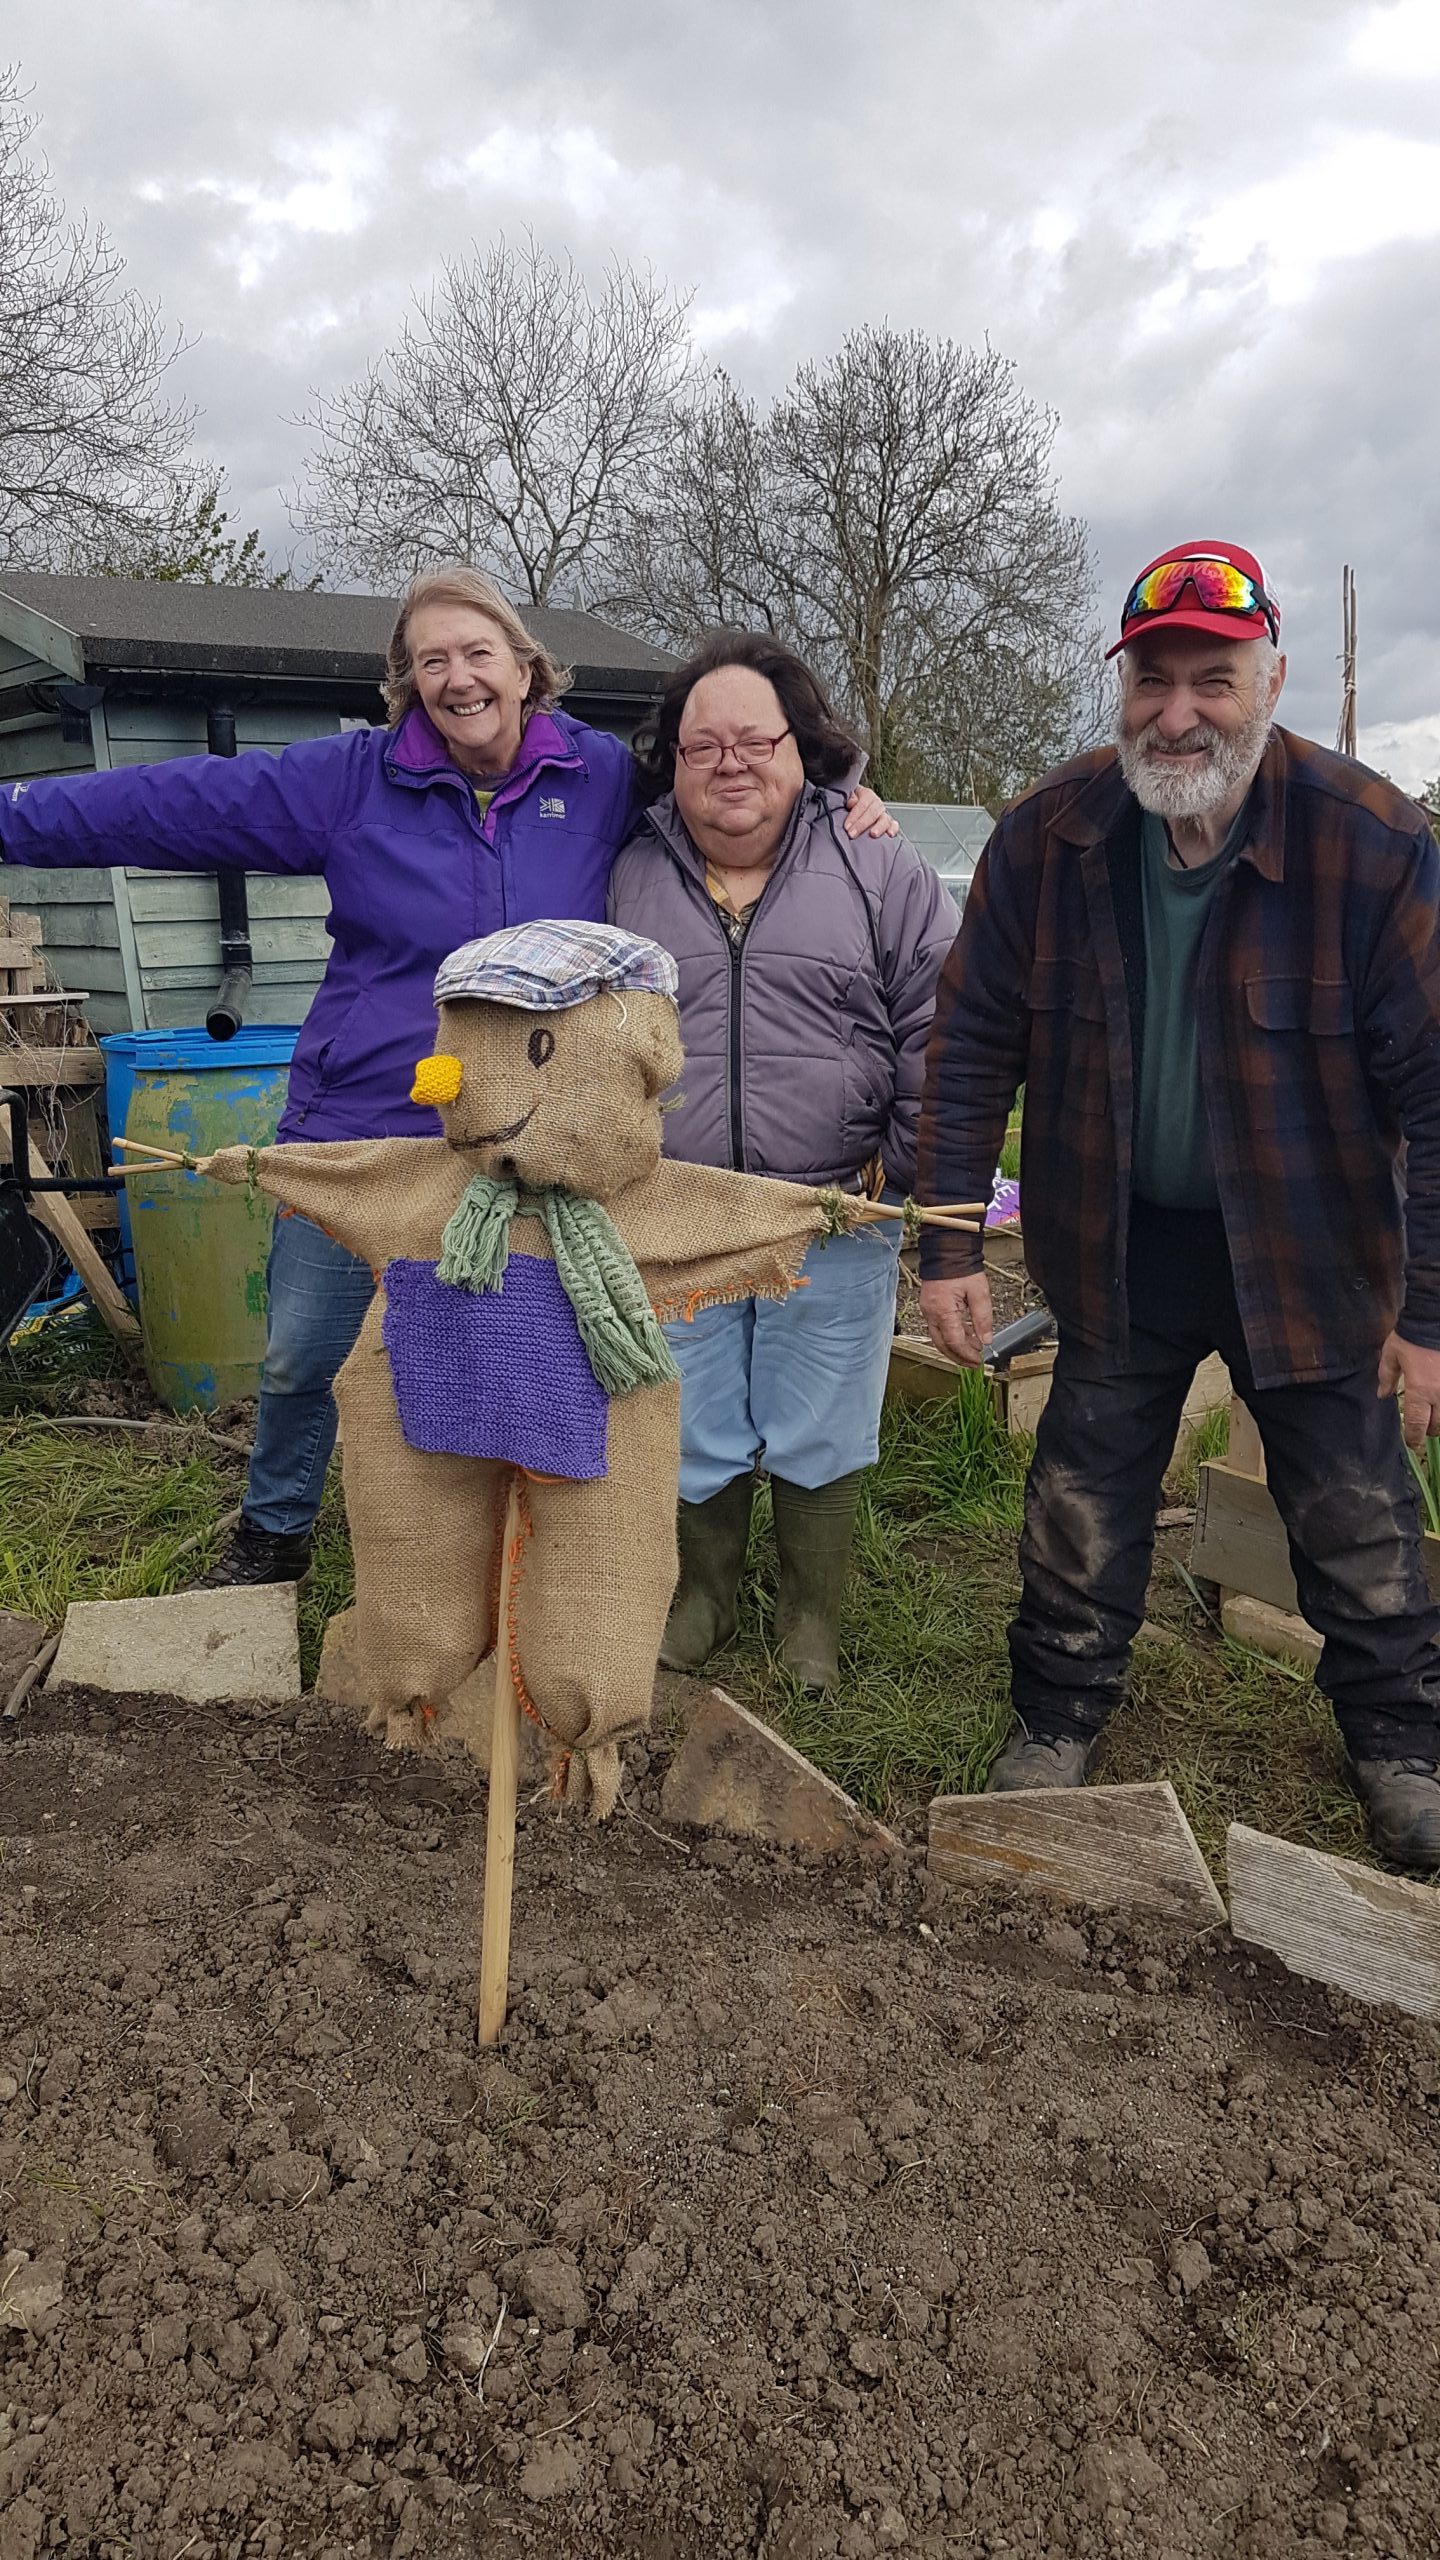 Martock Friends Group and The Community Allotment Project